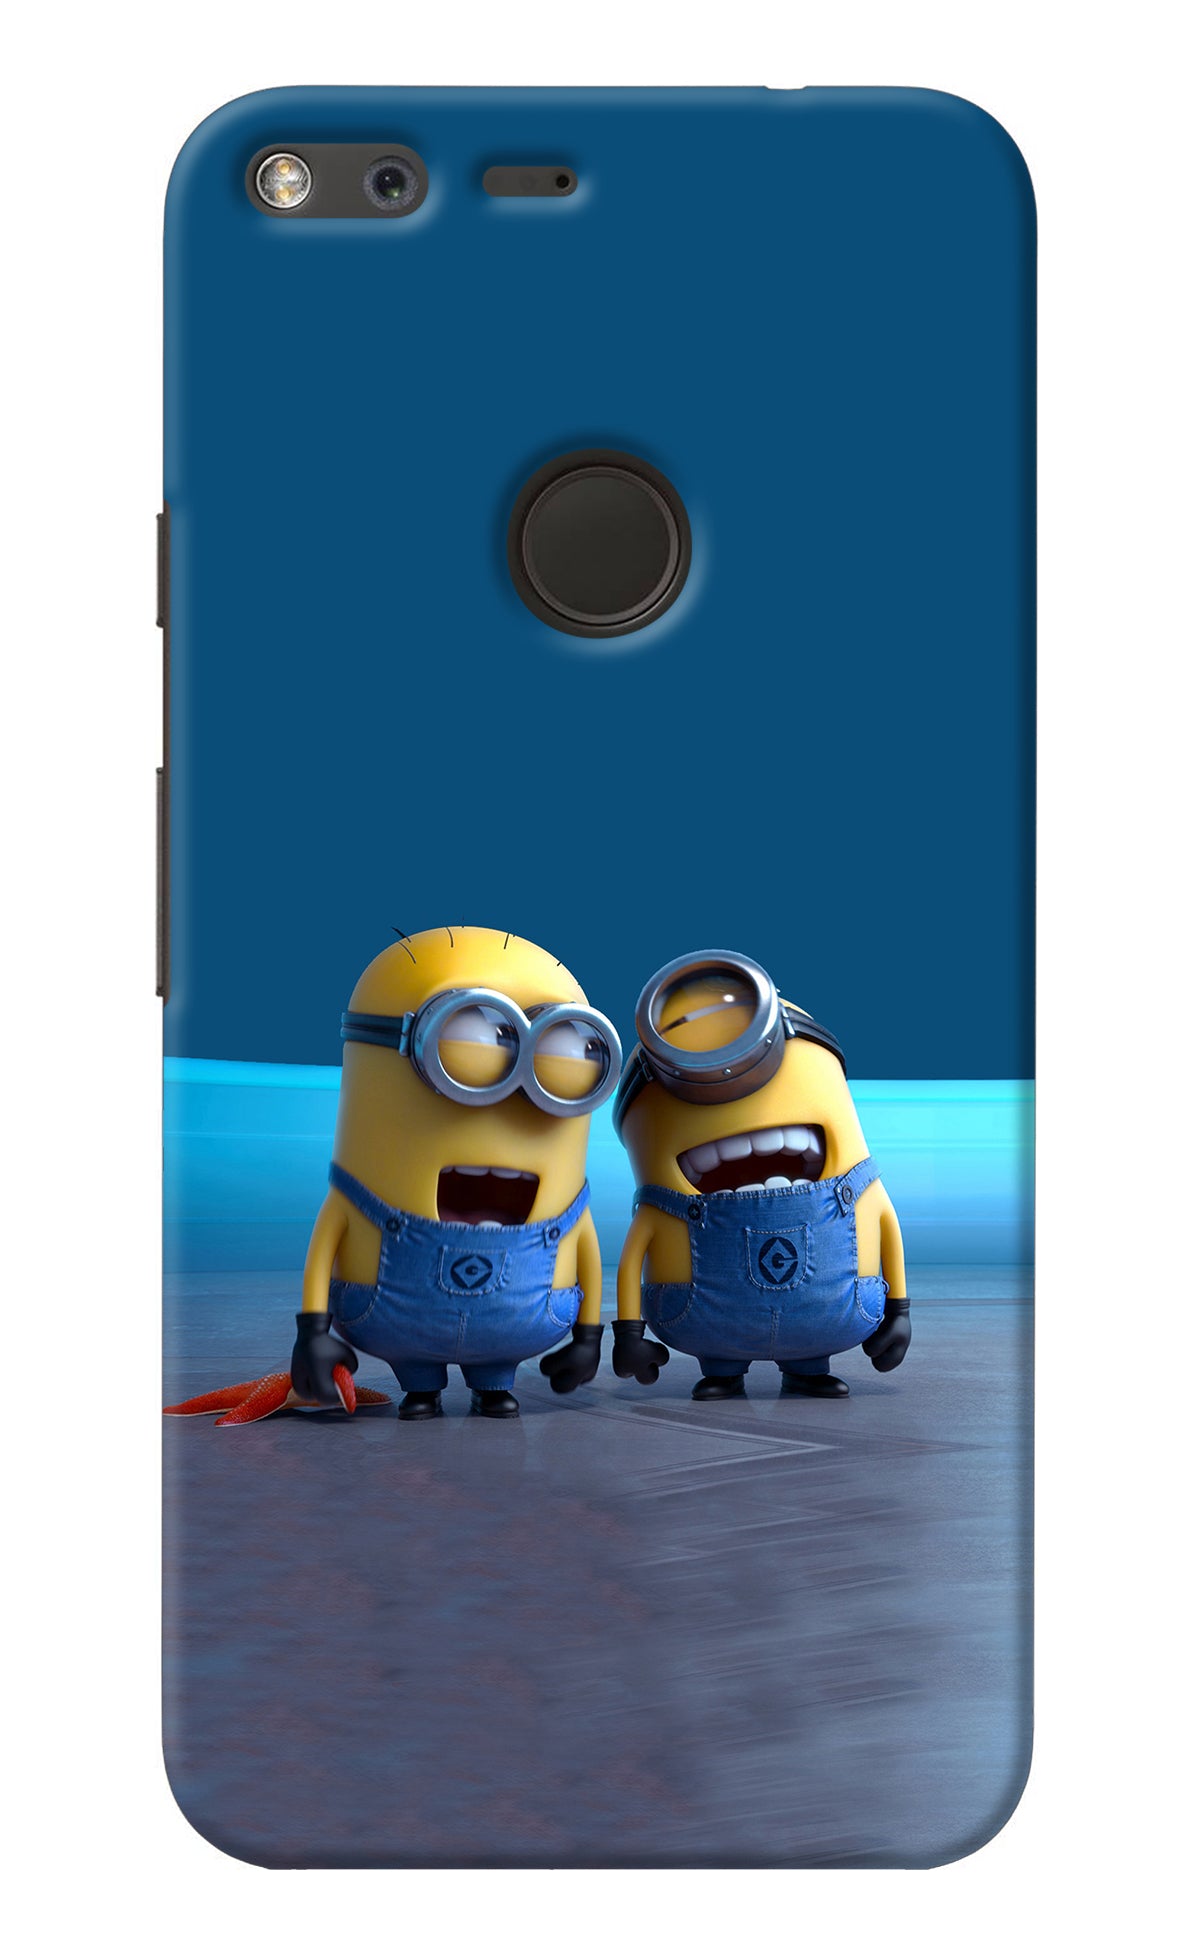 Minion Laughing Google Pixel XL Back Cover